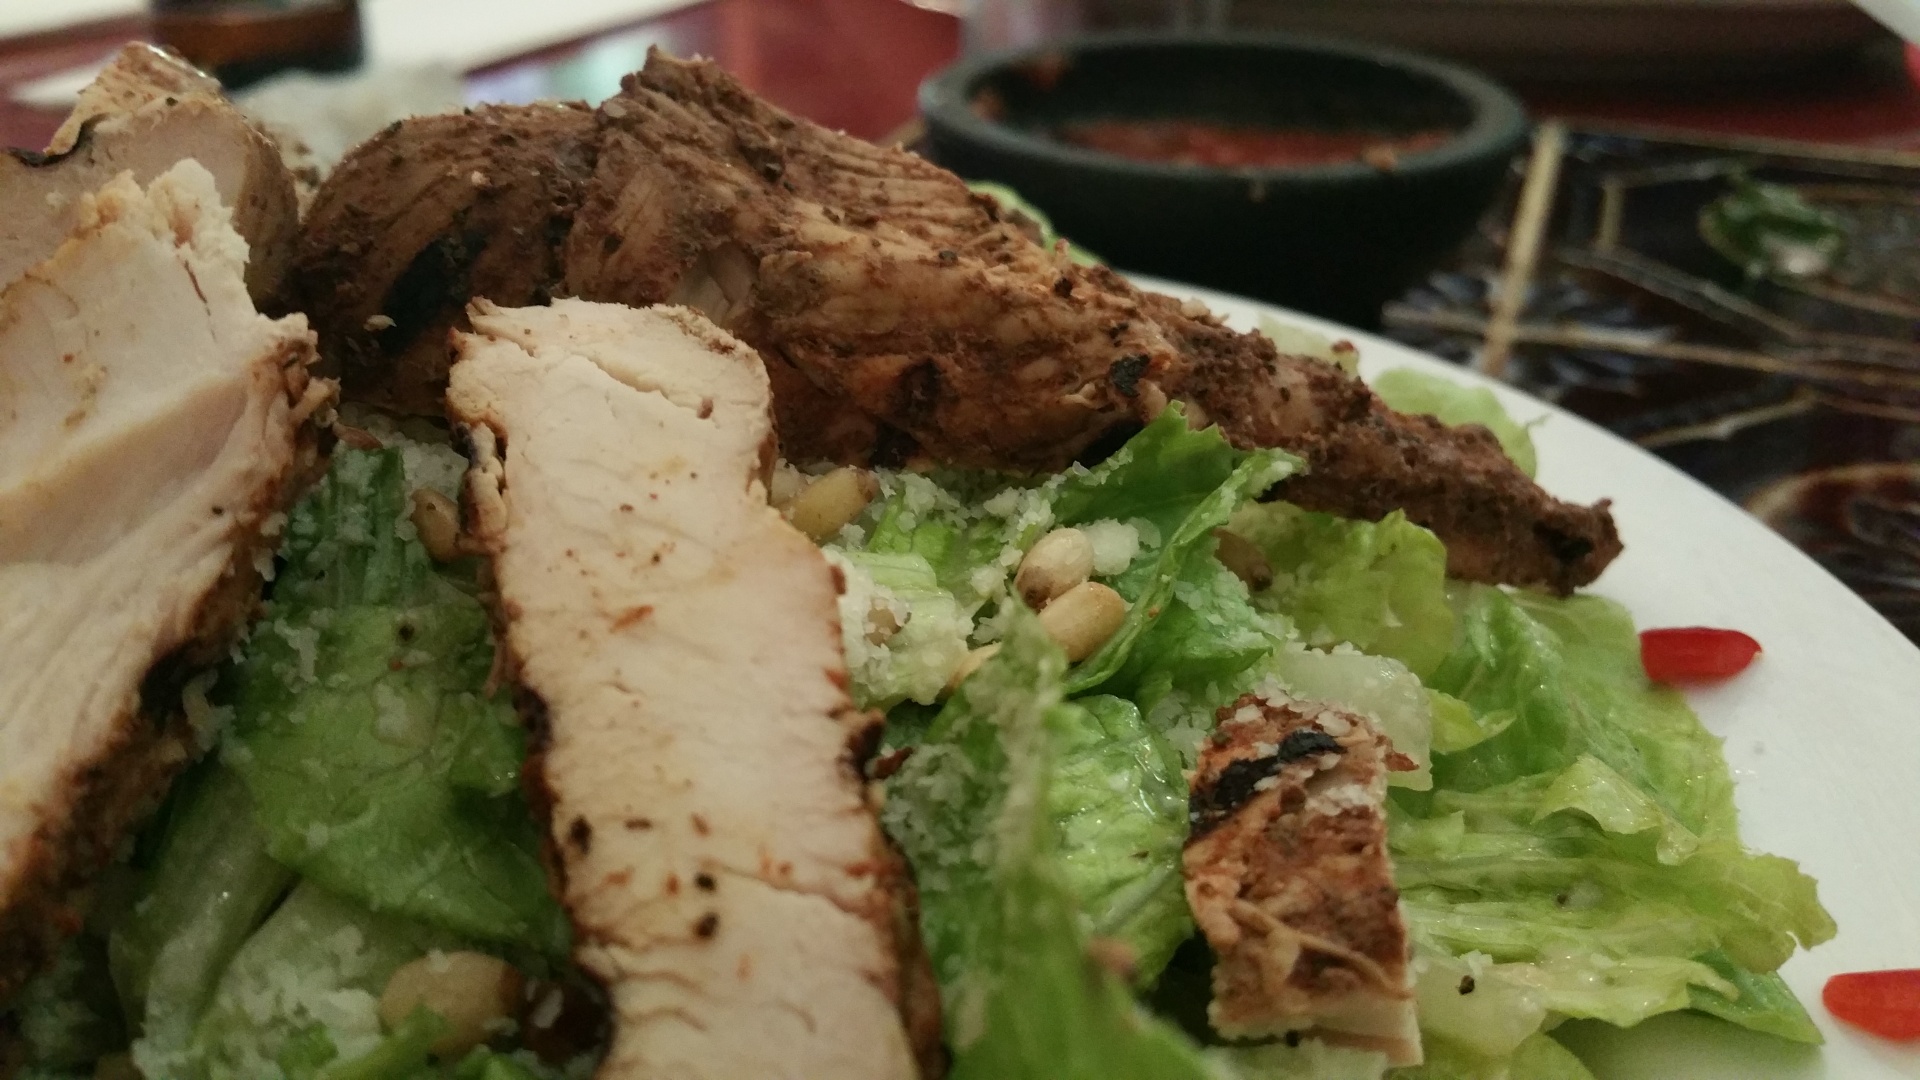 Chicken, lettuce and caesar dressing served at a restaurant